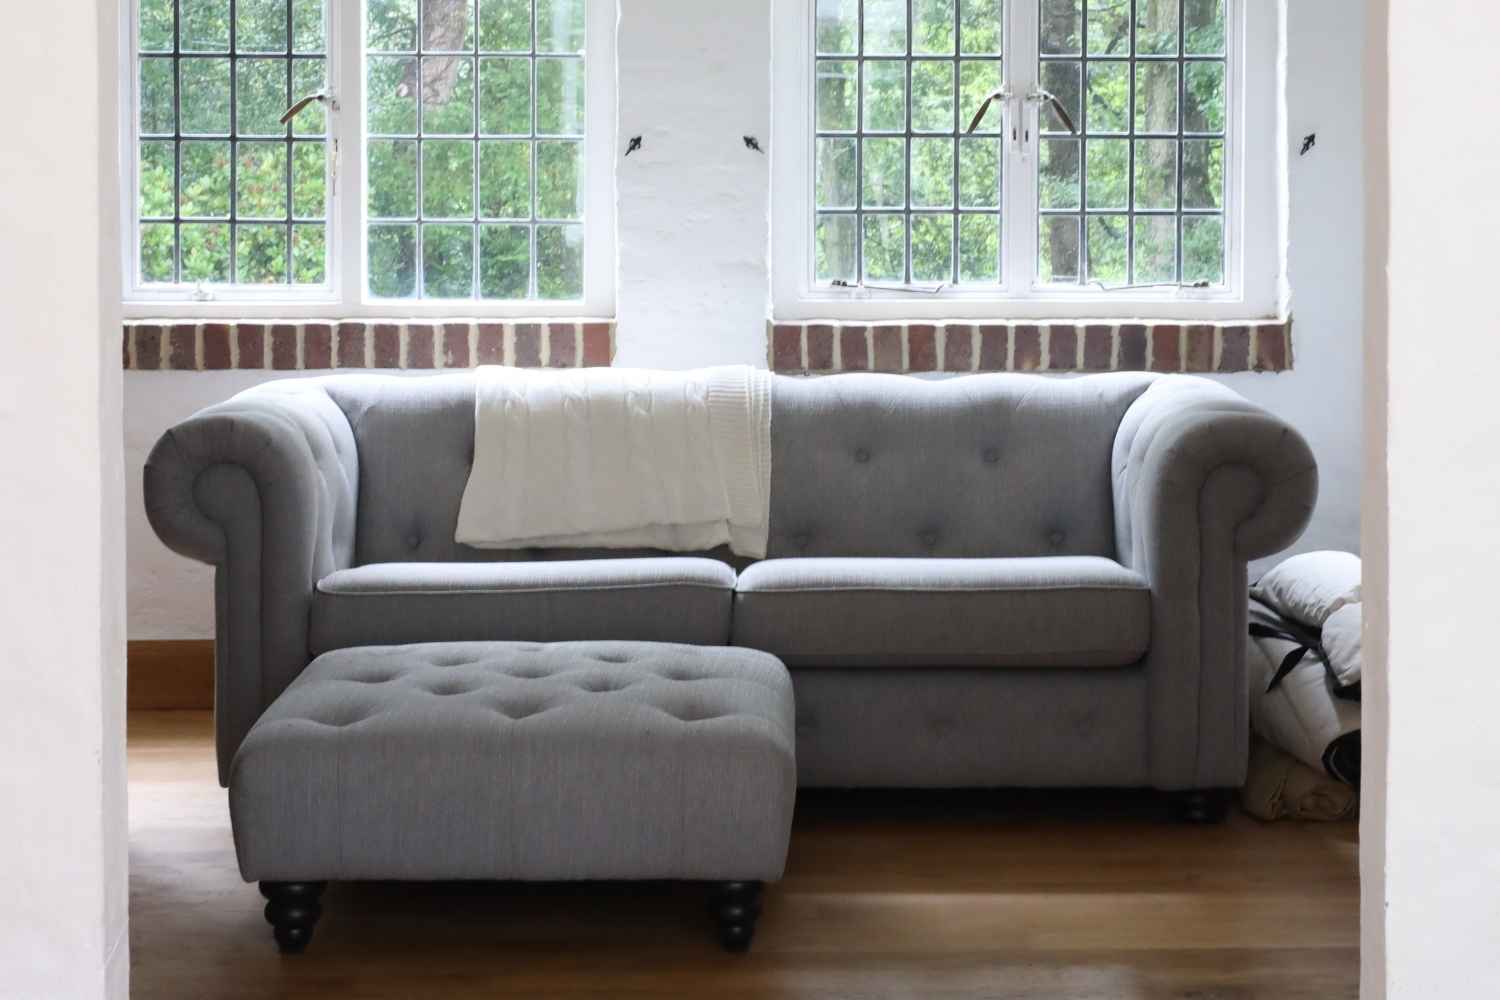 Squishy sofas for relaxing